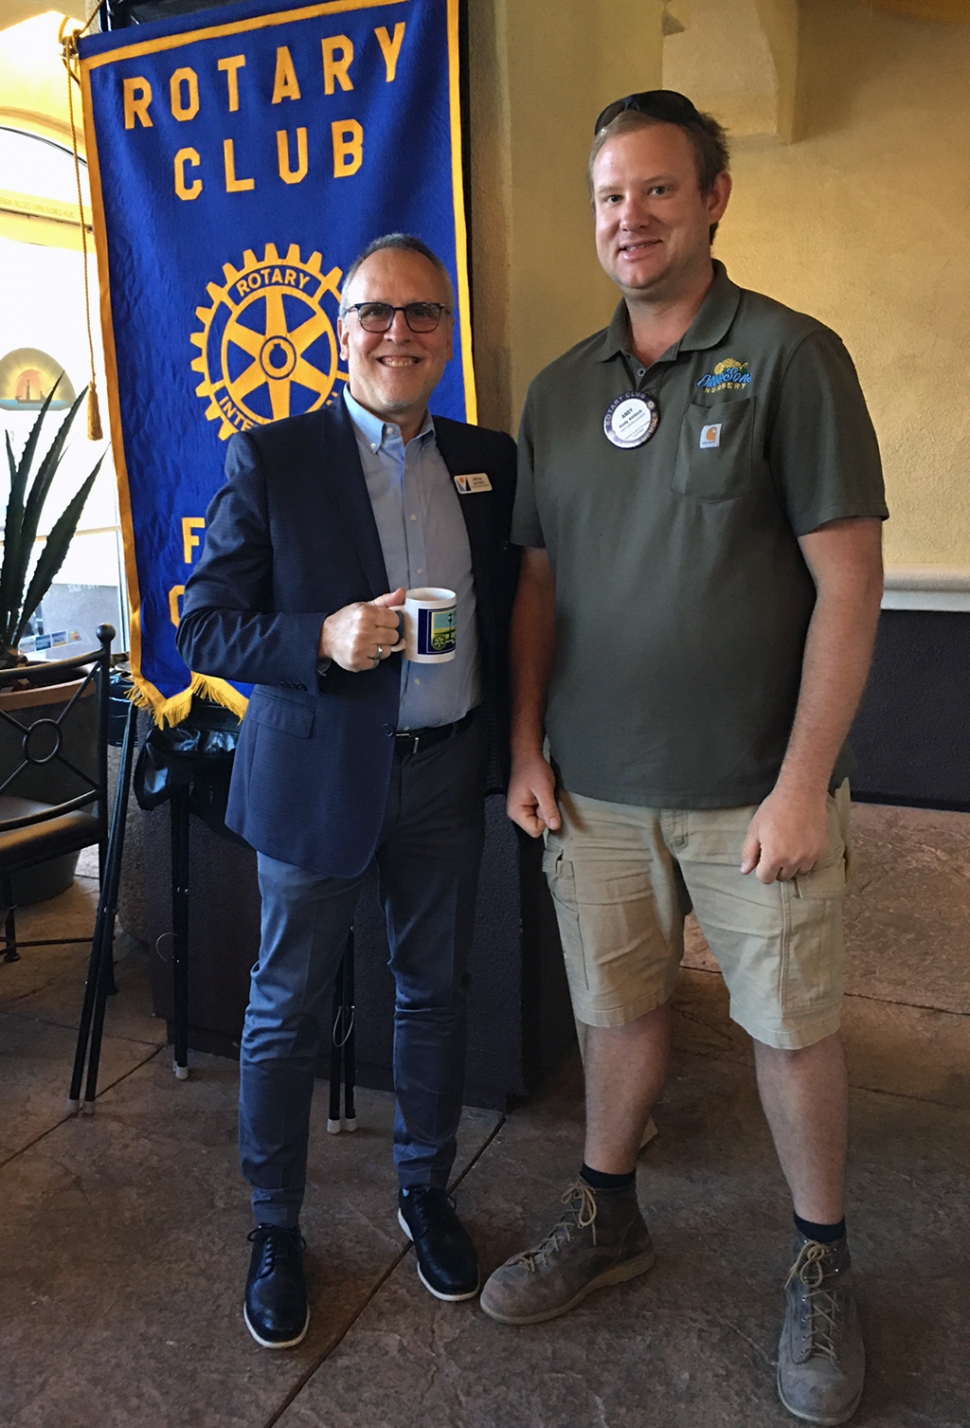 On Wednesday, April 6, Rotary Club President Andy Klittich (right) welcomed guest speaker Jeffrey Lambert, Chief Operating Officer of the Ventura County Community Foundation, a nonprofit center. The organization represents donors who want to give back to the community and invests money so yearly donations can be made. They provide funds to other non-profits to help them grow, give scholarships to change kid’s lives, have caregivers who navigate hospitals to help people, and they help the Early Childhood Preschool facilities in Santa Paula with funding. This is only a small example of what they do. For more info: VCCF.org. Photo credit Rotarian Martha Richardson.